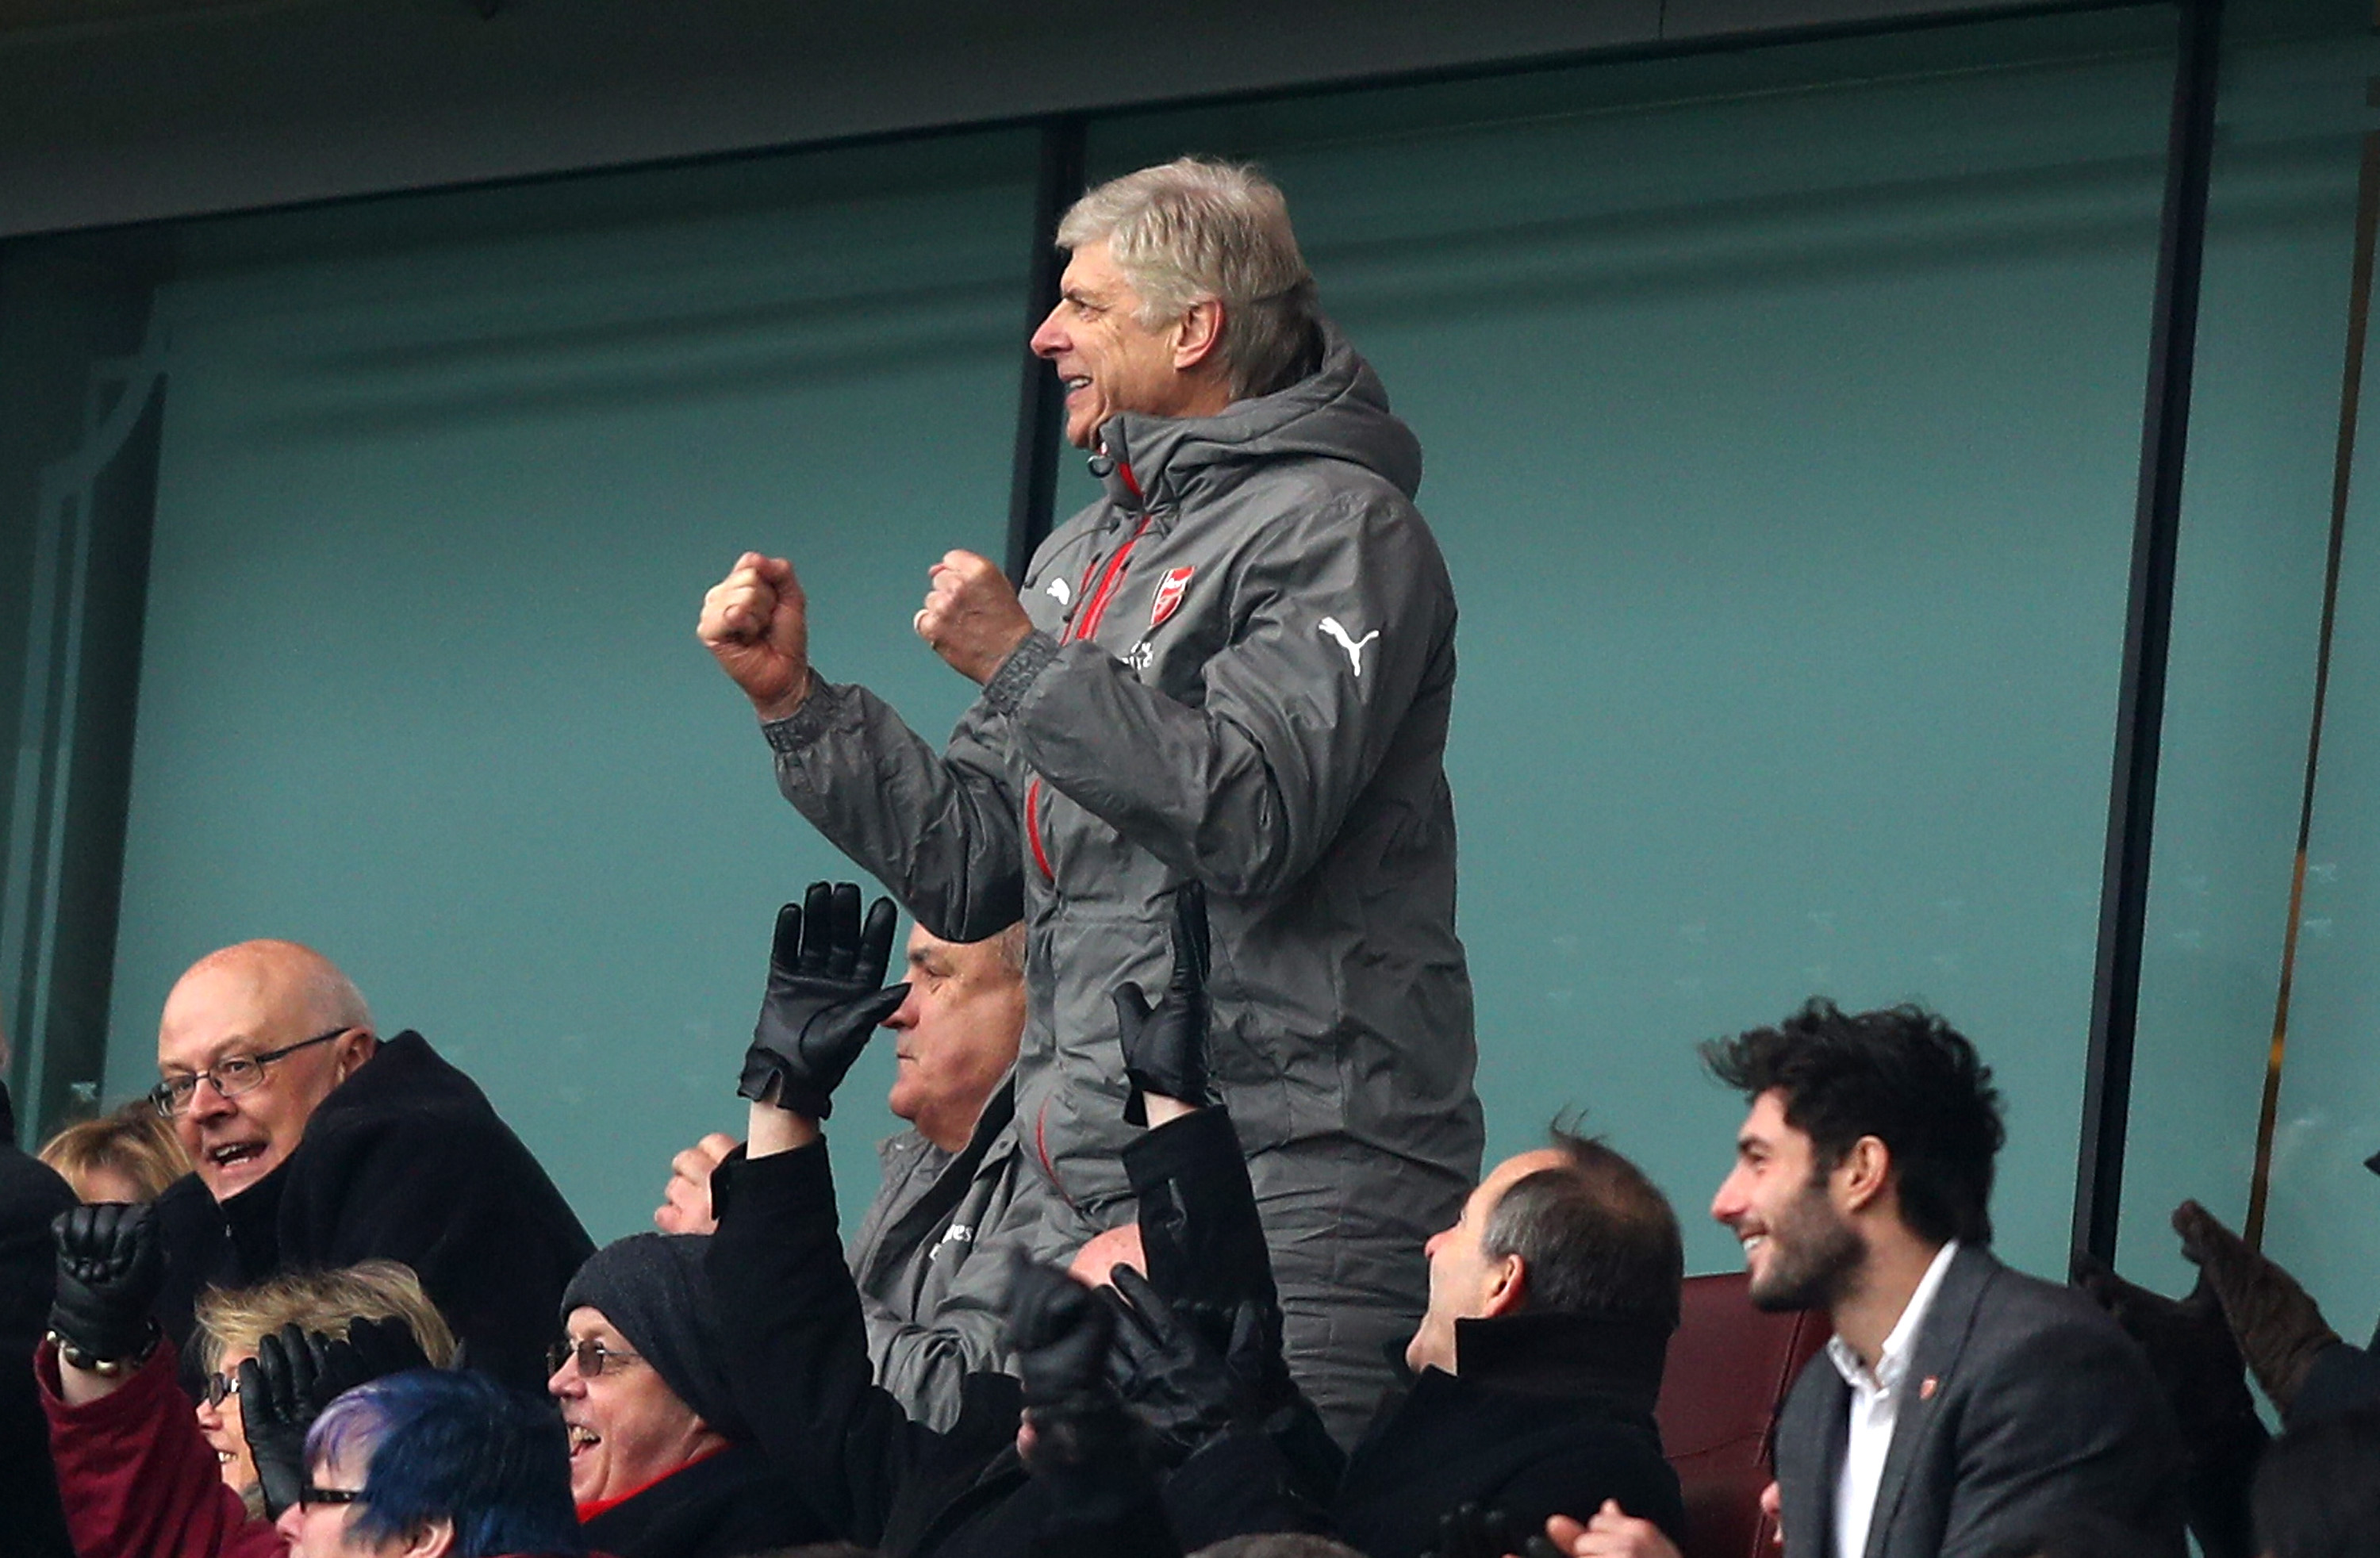 LONDON, ENGLAND - FEBRUARY 11: Arsene Wenger, Manager of Arsenal celebrates his team's first goal in the stand during the Premier League match between Arsenal and Hull City at Emirates Stadium on February 11, 2017 in London, England.  (Photo by Clive Rose/Getty Images)